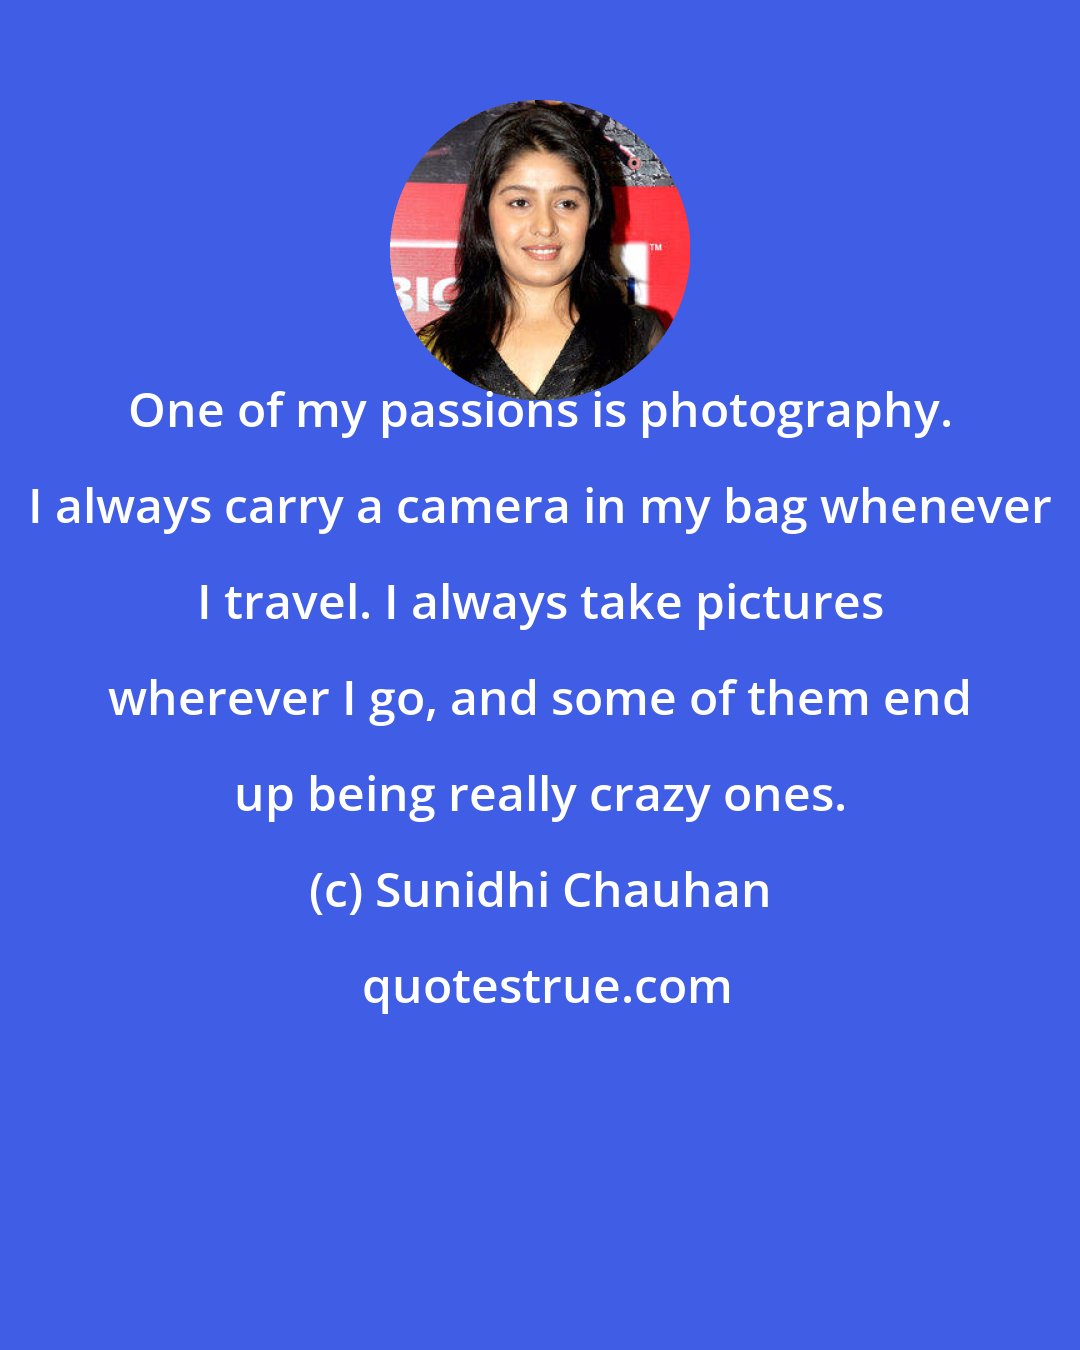 Sunidhi Chauhan: One of my passions is photography. I always carry a camera in my bag whenever I travel. I always take pictures wherever I go, and some of them end up being really crazy ones.